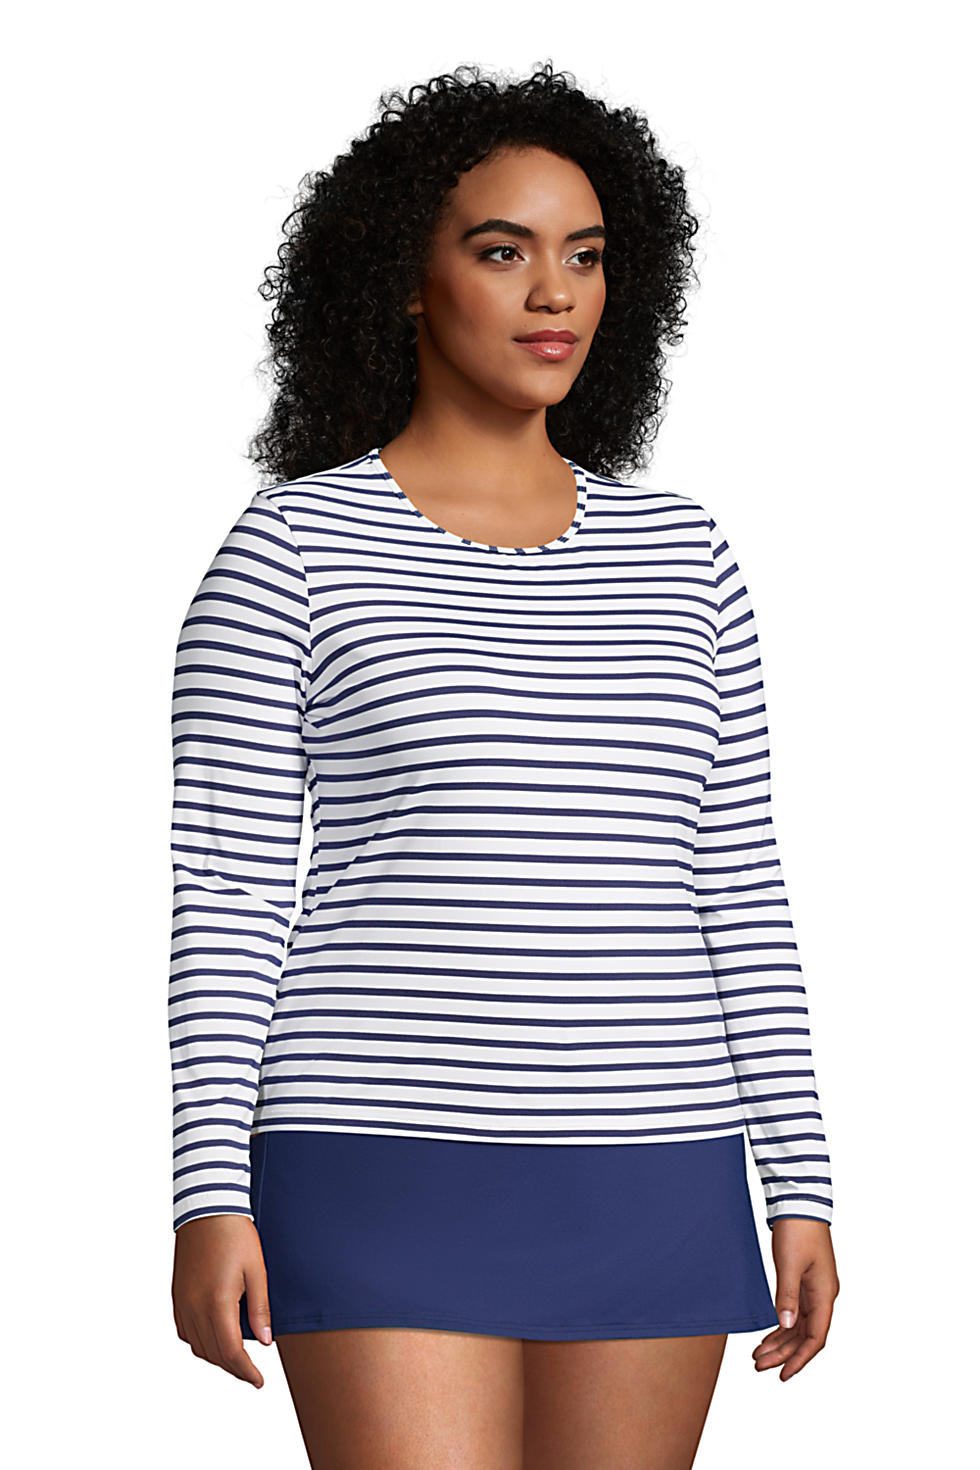 Plus Size Rash Guard for Women from Lands' End with Blue and White Stripes